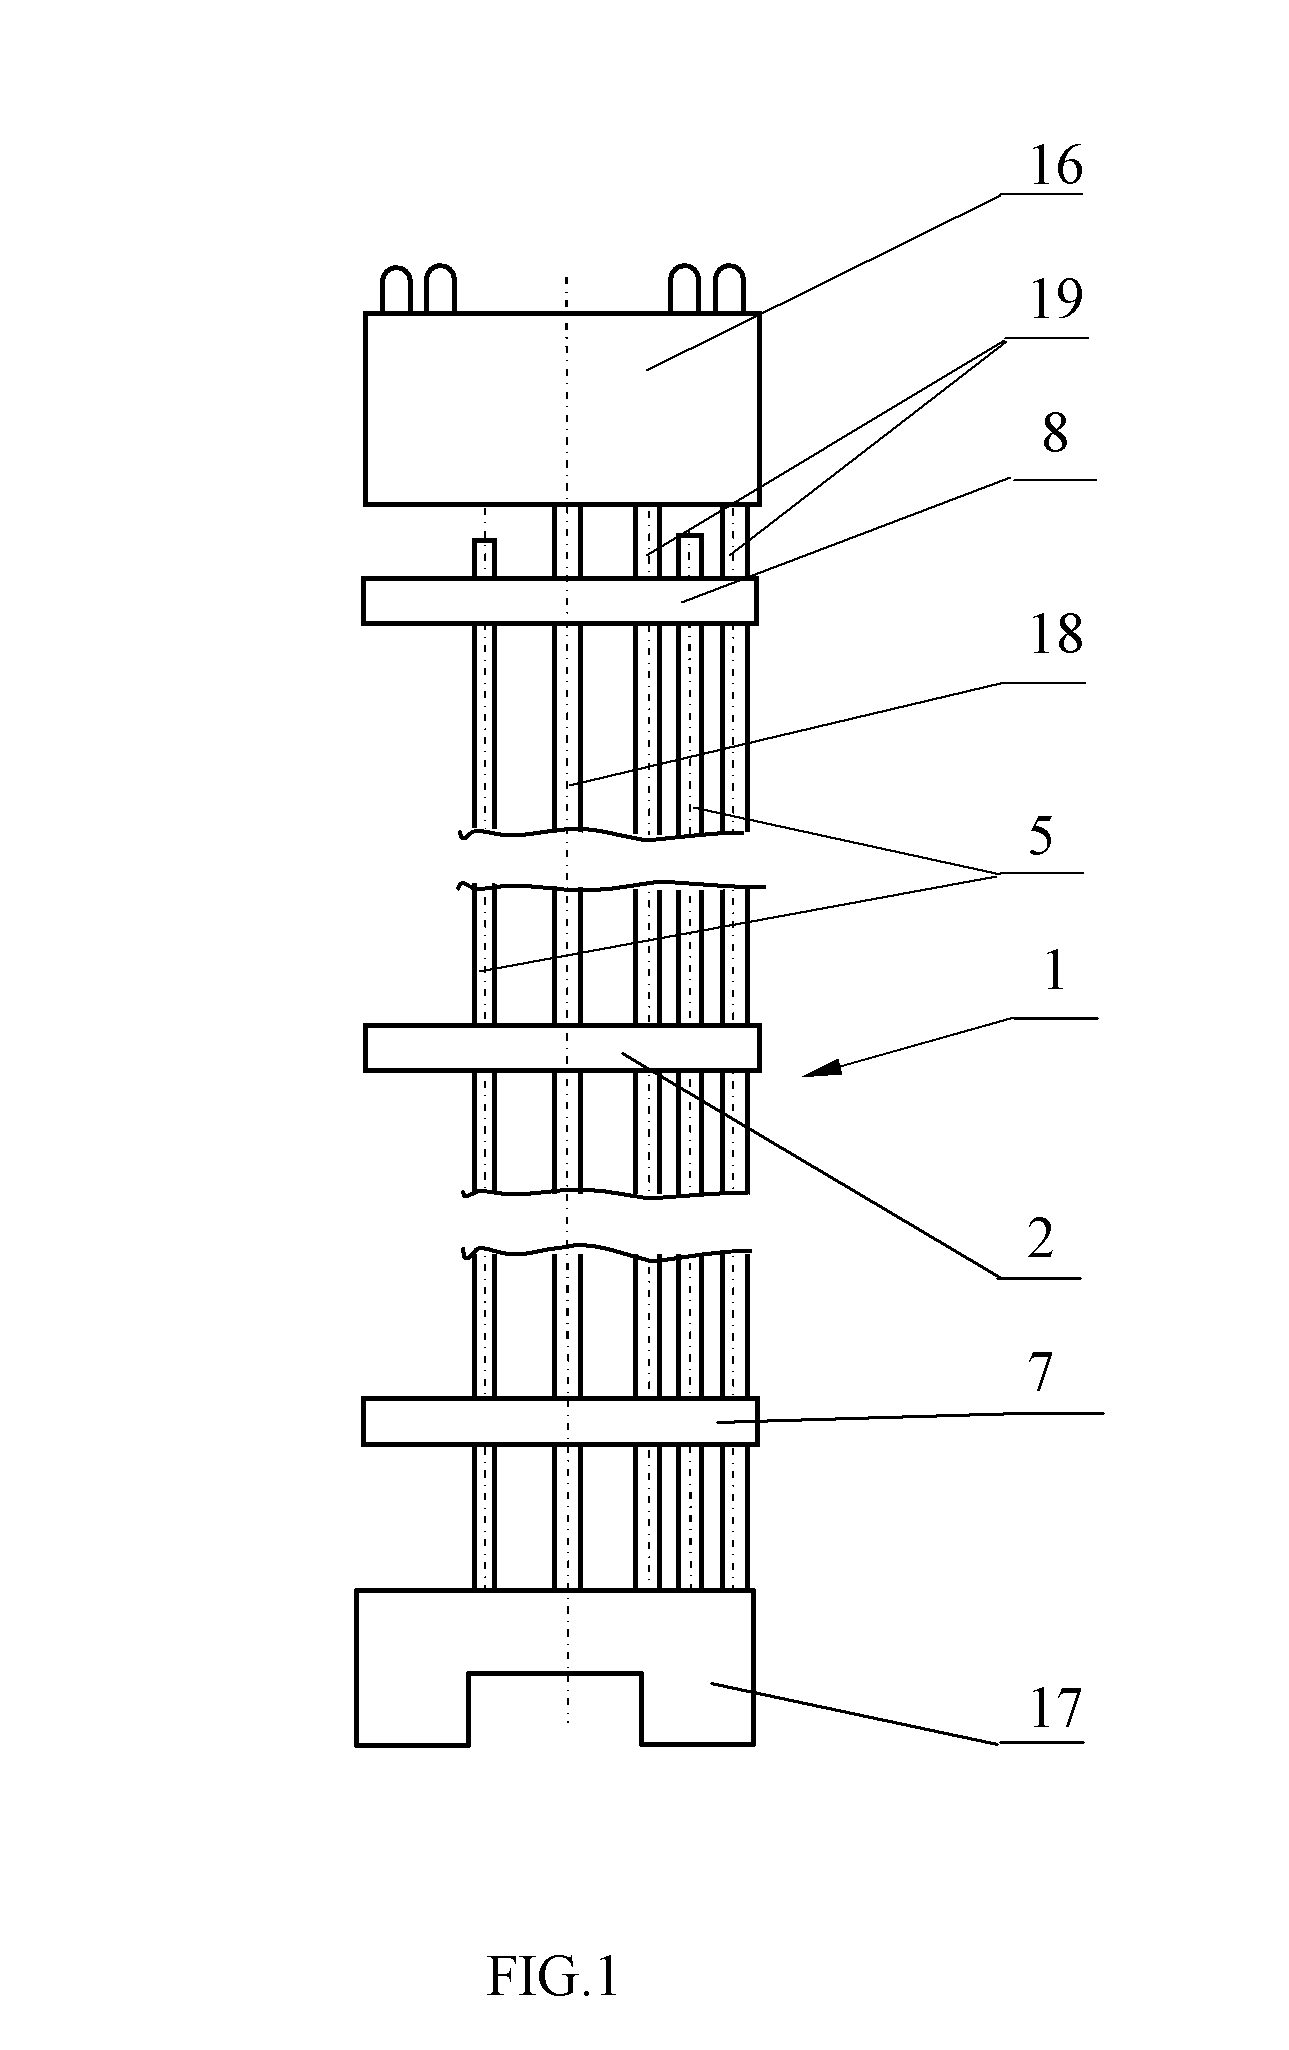 Fuel assembly and plug-in distance element